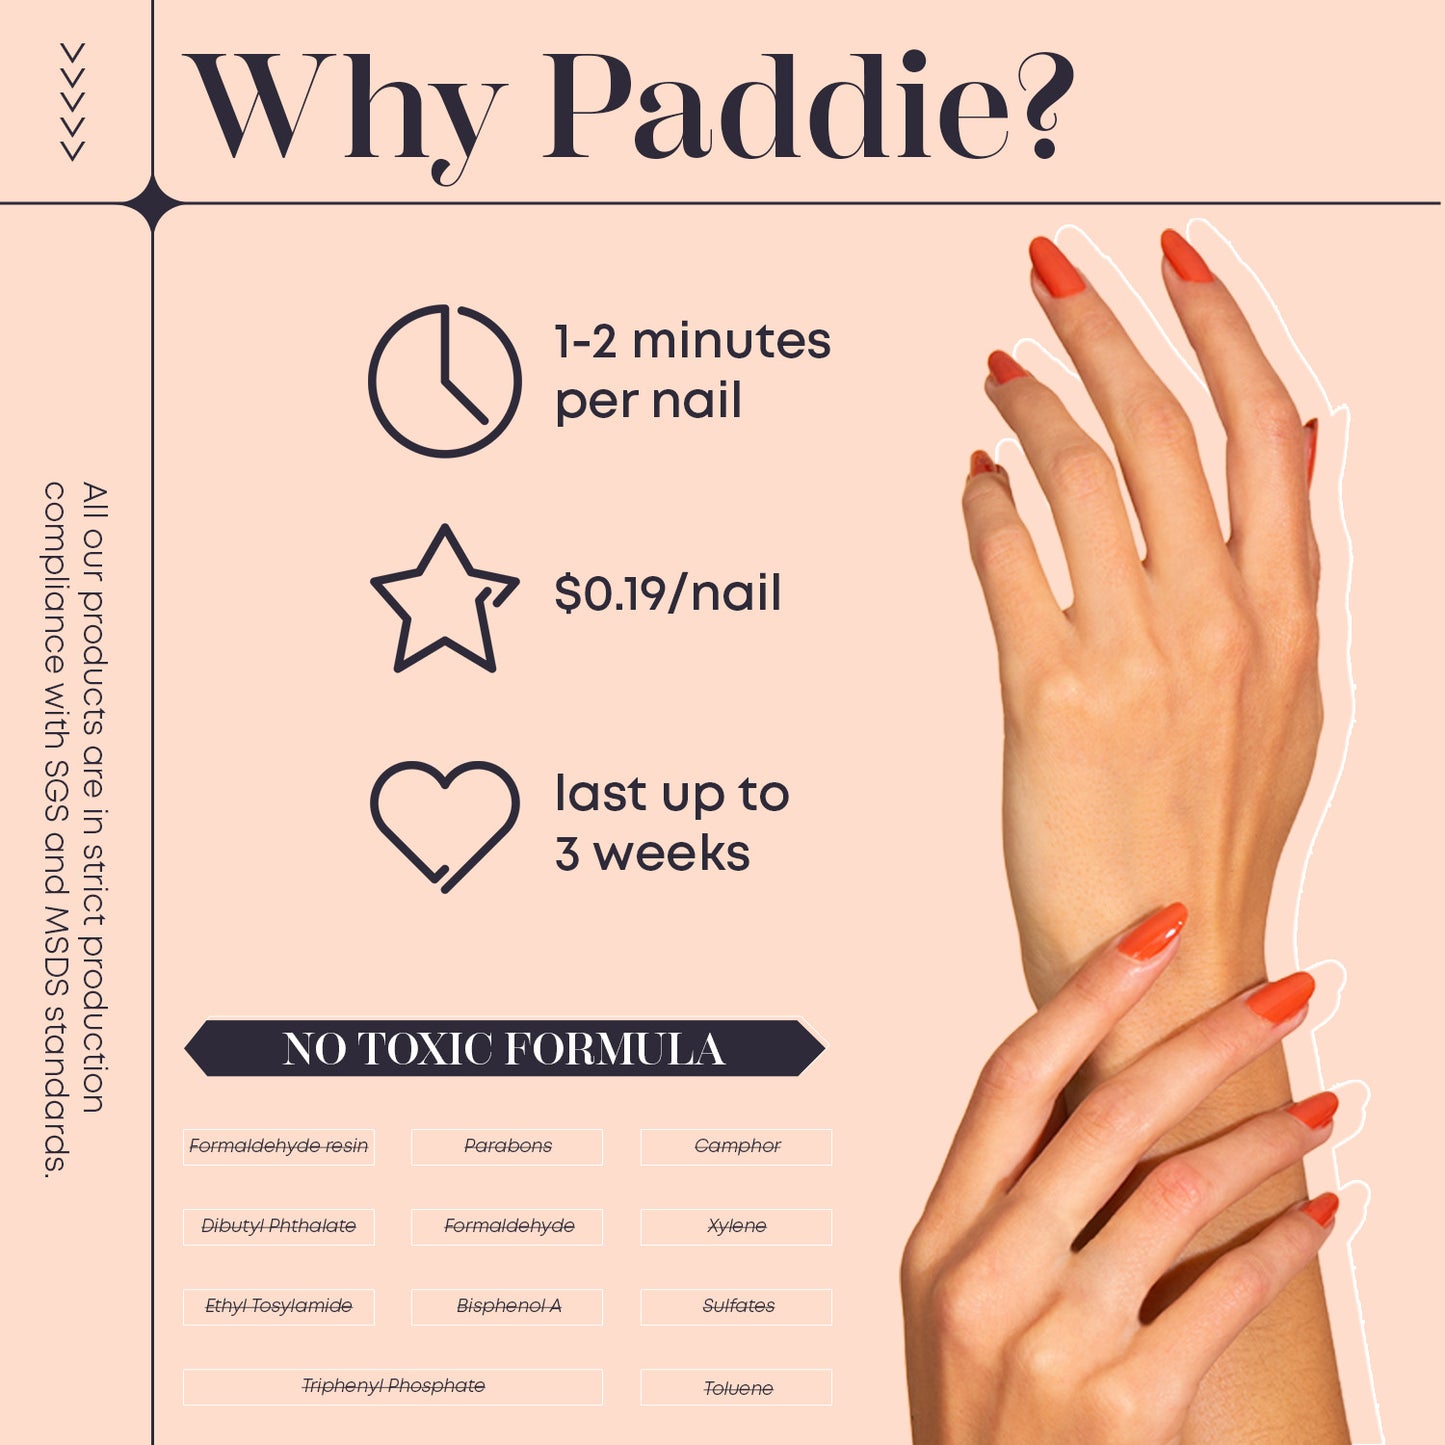 Paddie’s Nail Polygel offers -  application in under 1-2 minutes per nail, costs only $0.19 per nail, lasts up to 3 weeks, and contains no harmful chemicals.